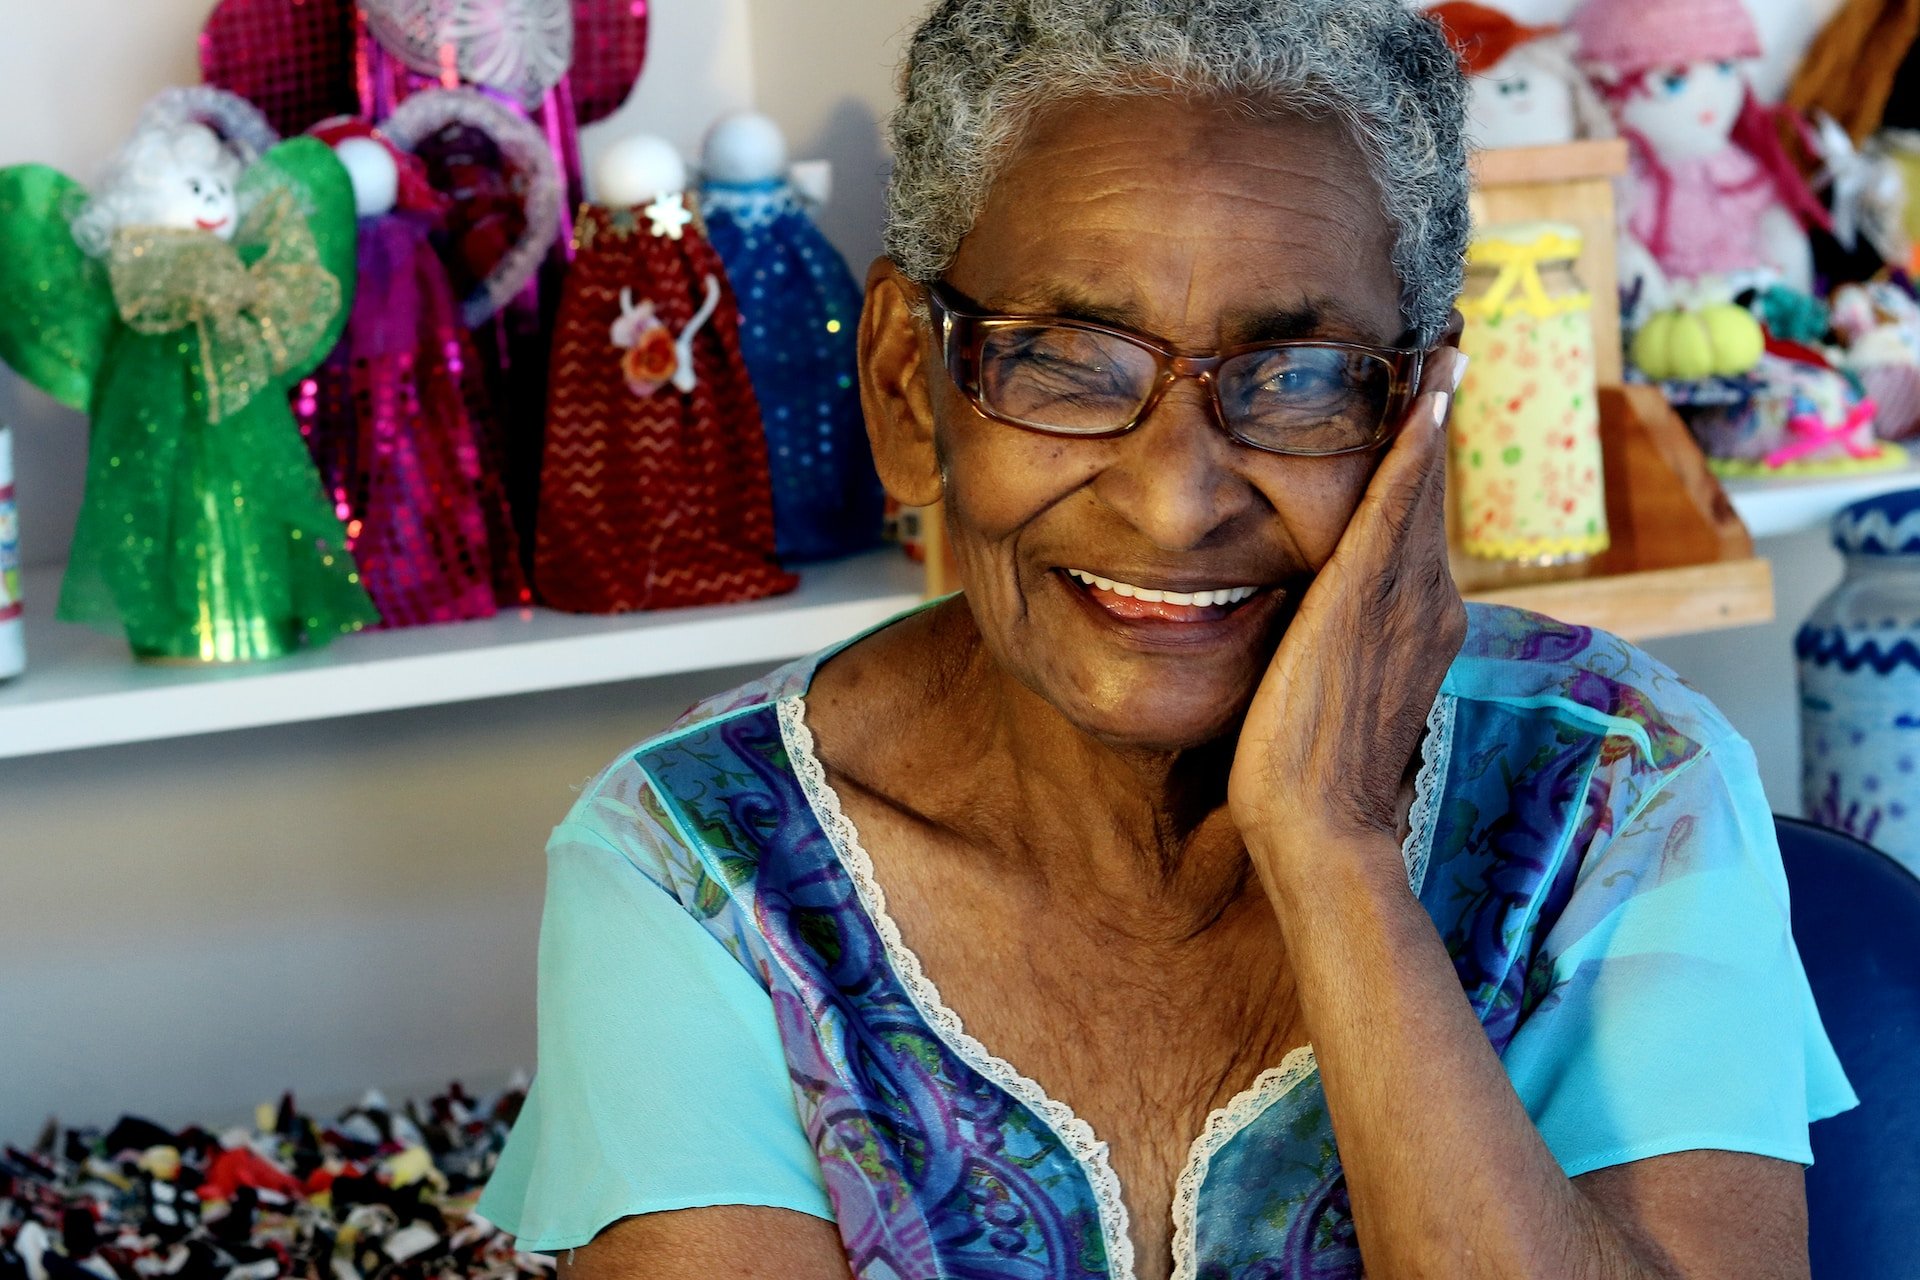 Elderly woman with medium brown skin and gray hair has a big smile with a full set of white teeth. She is wearing a 2-toned blue shirt and has her left hand on the side of her face, The background has colorful doll costumes and related crafts.